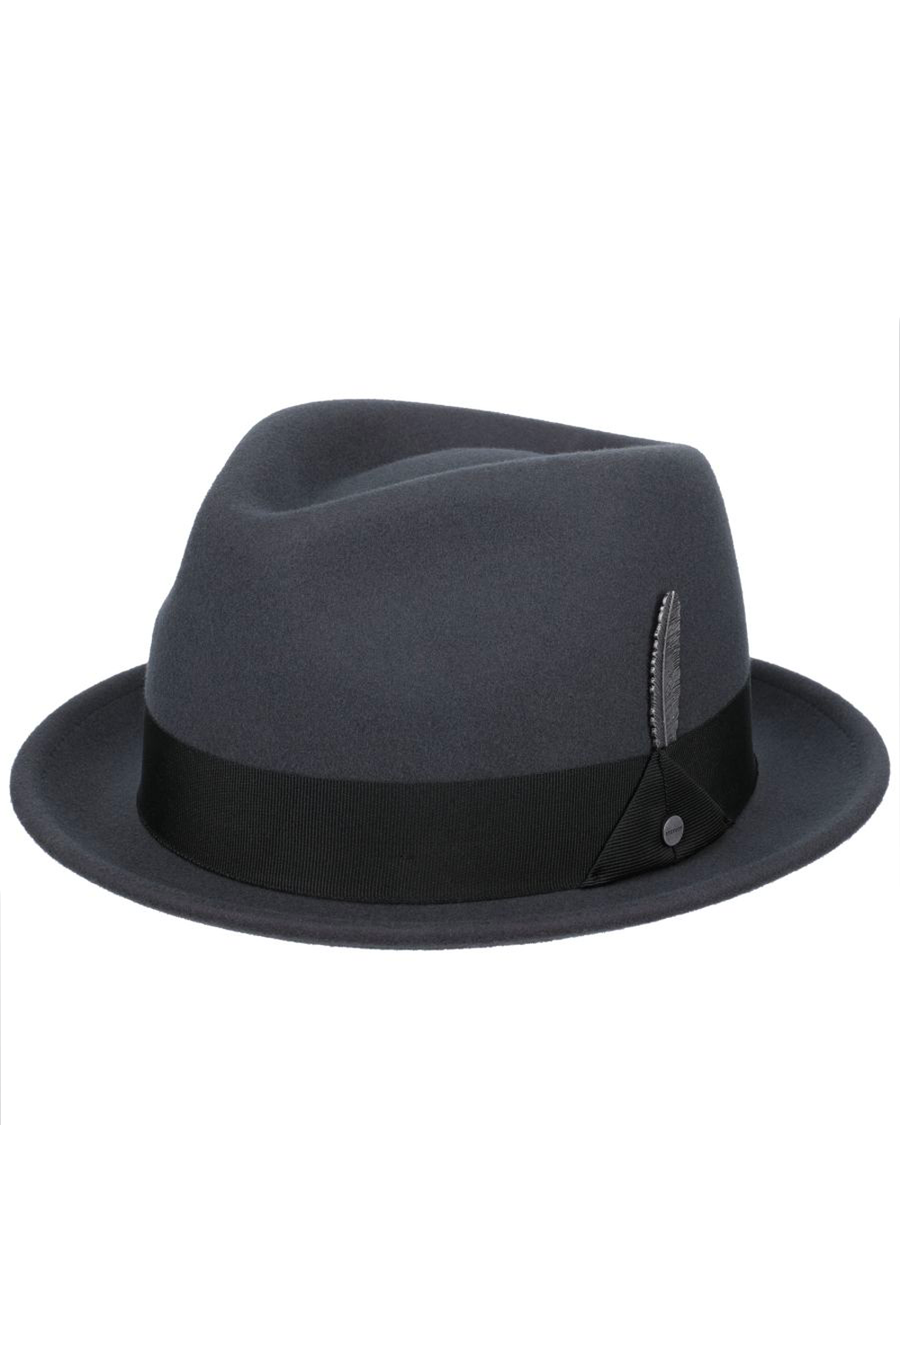 Buy the Stetson Vencaster Player Wool Hat Dark Grey at Intro. Spend £100 for free next day UK delivery. Official stockists. We ship worldwide